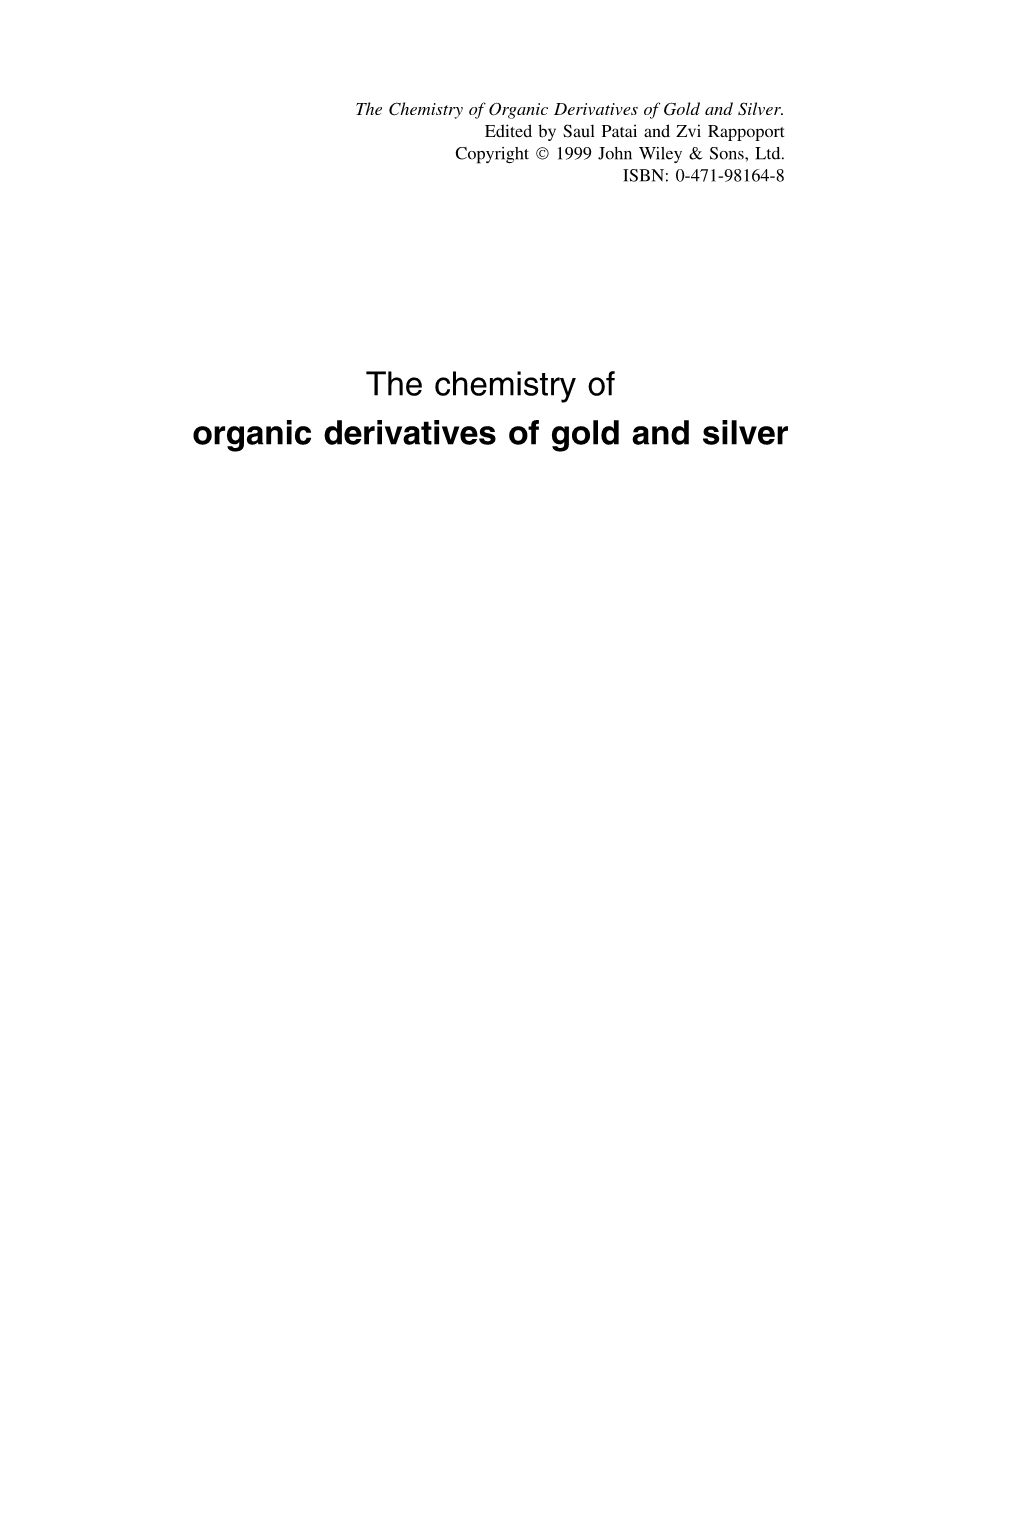 The Chemistry of Organic Derivatives of Gold and Silver